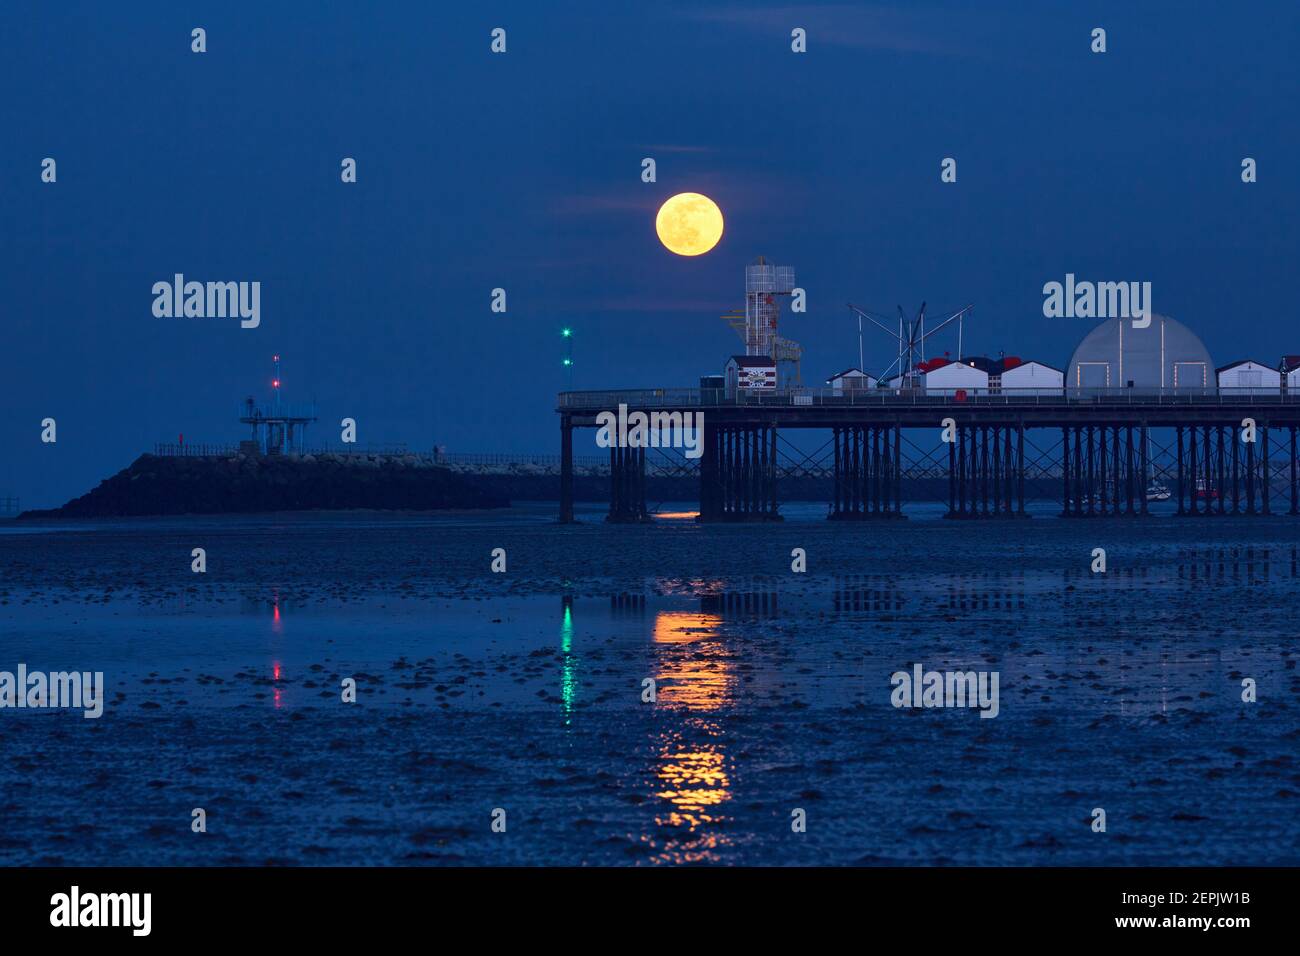 Herne Bay, Kent, UK. 27th February 2021: UK Weather. Full Snow moon just Waning Gibbous rises into a clear sky over Herne Bay pier at the end of a fine day, during the blue hour after sunset. Credit: Alan Payton/Alamy Live News Stock Photo